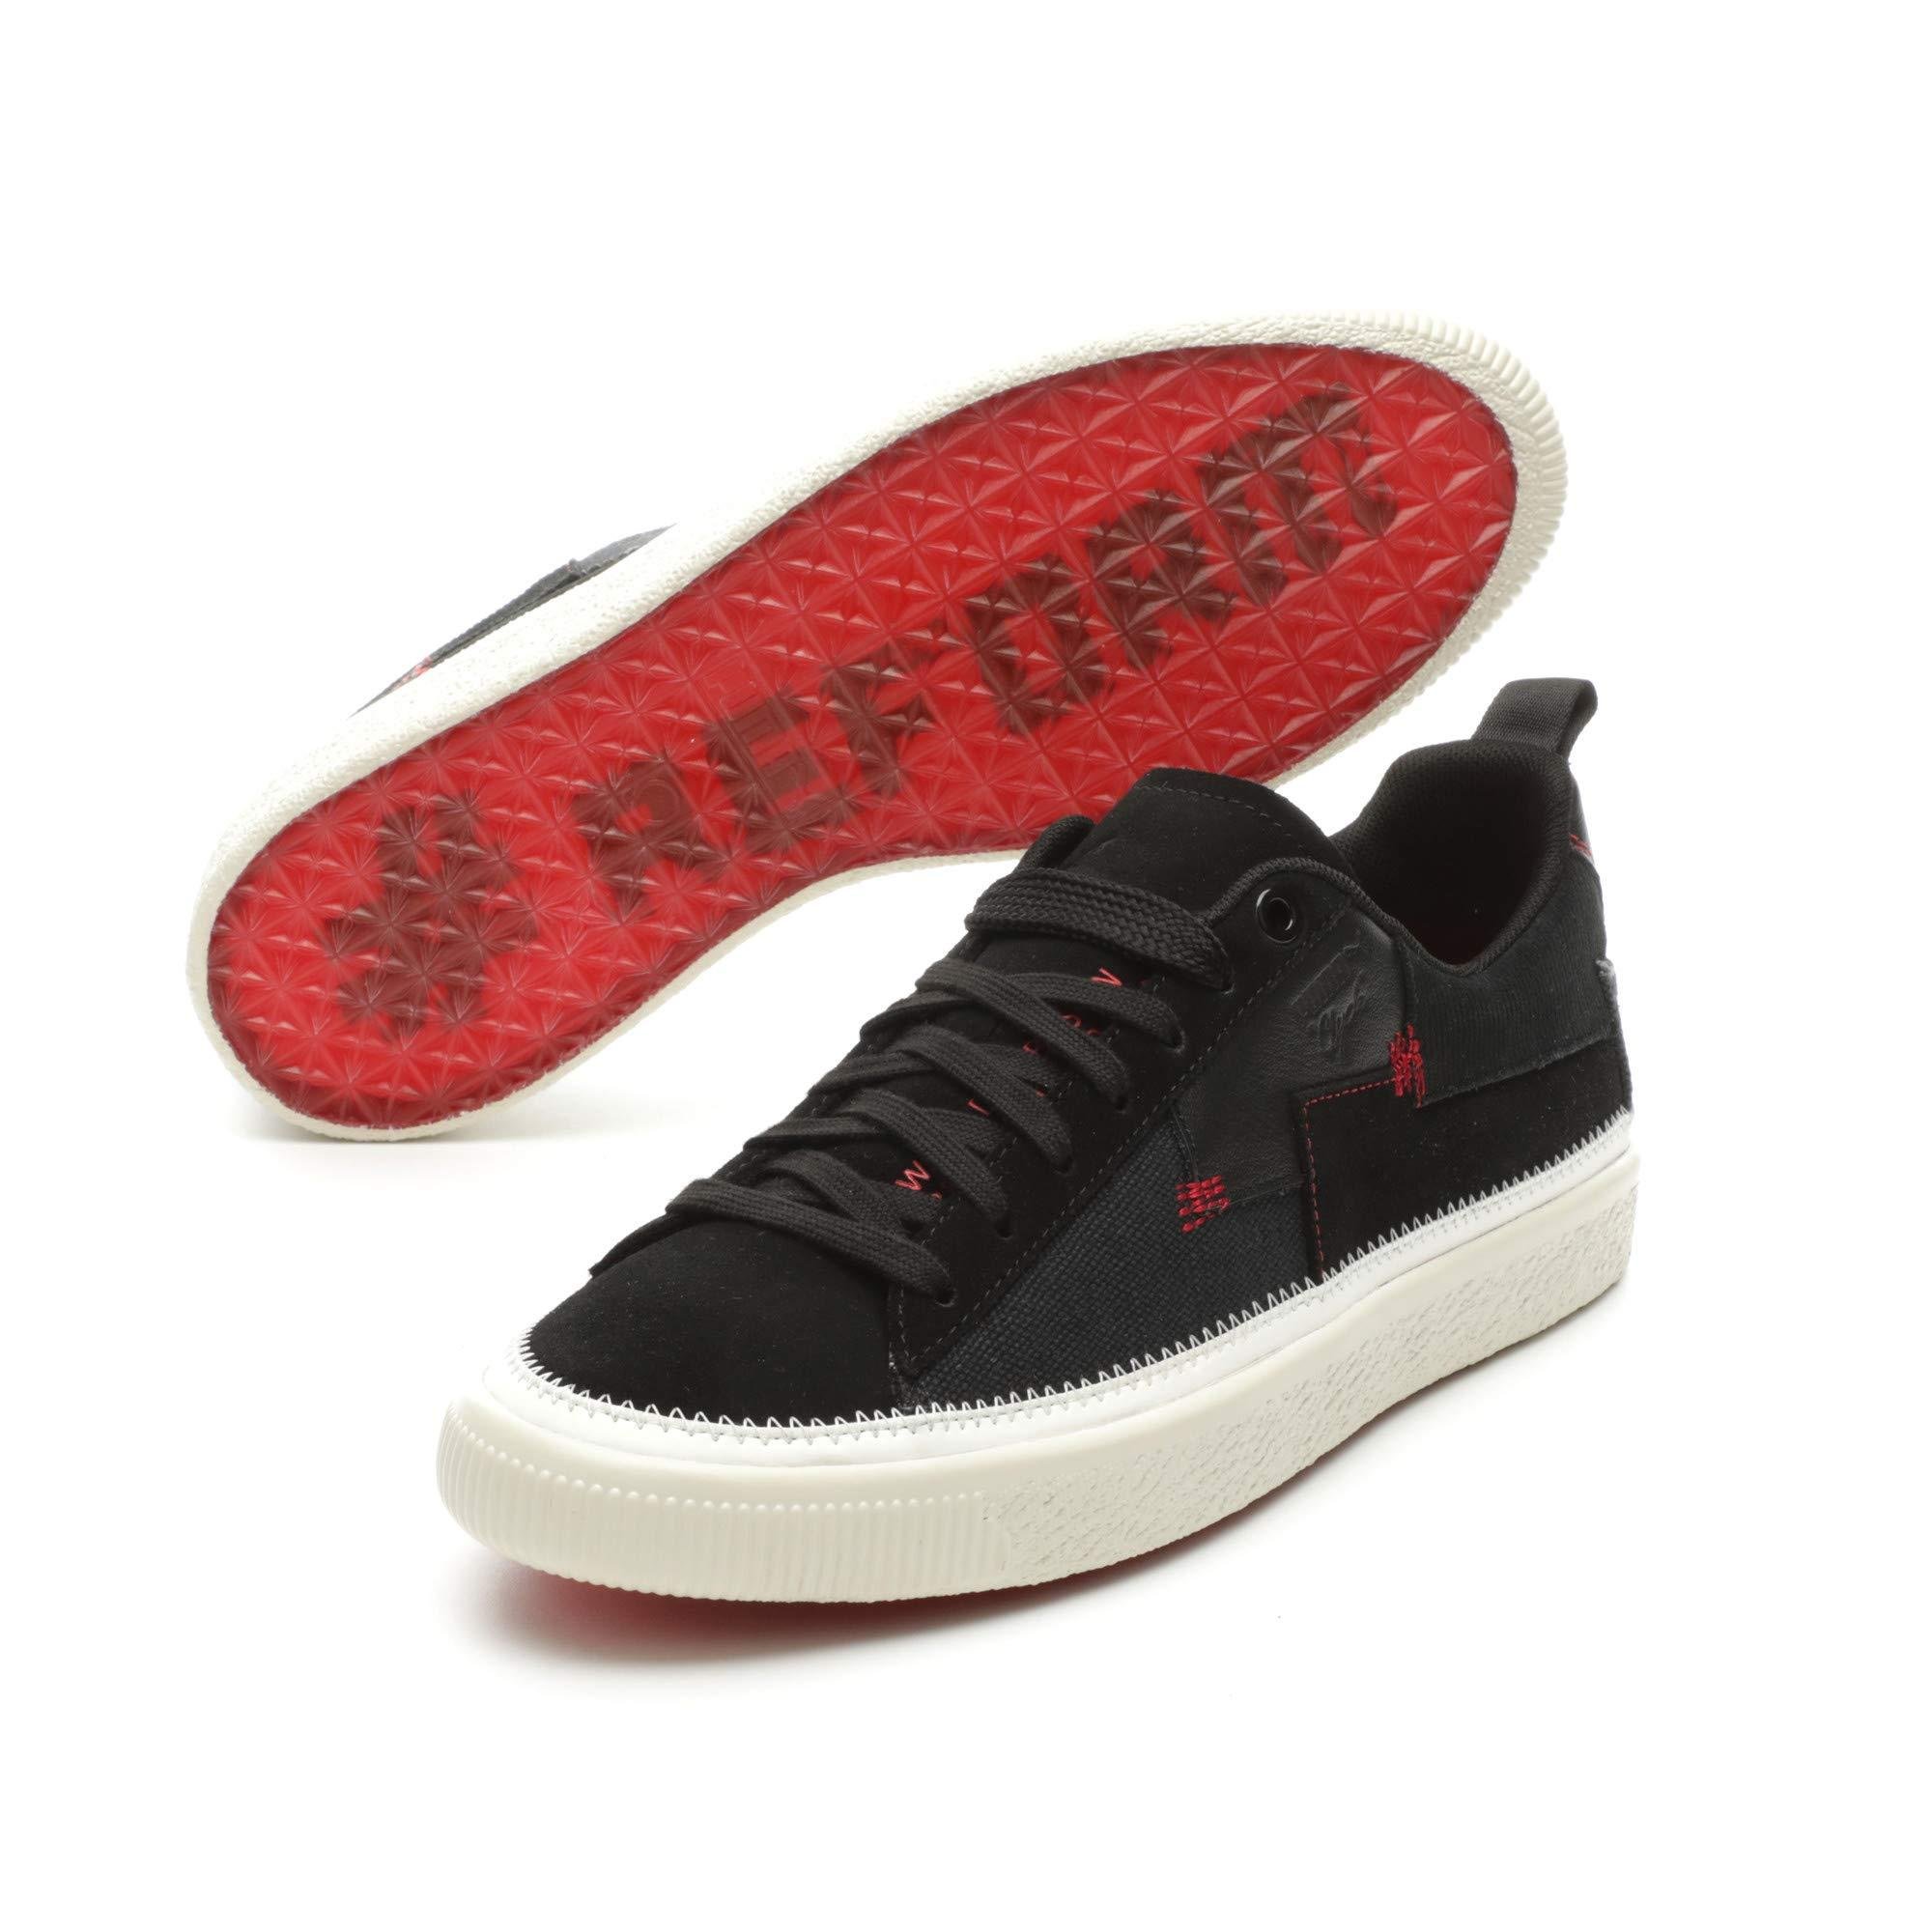 PUMA Clyde Reform Sneaker in Black for 